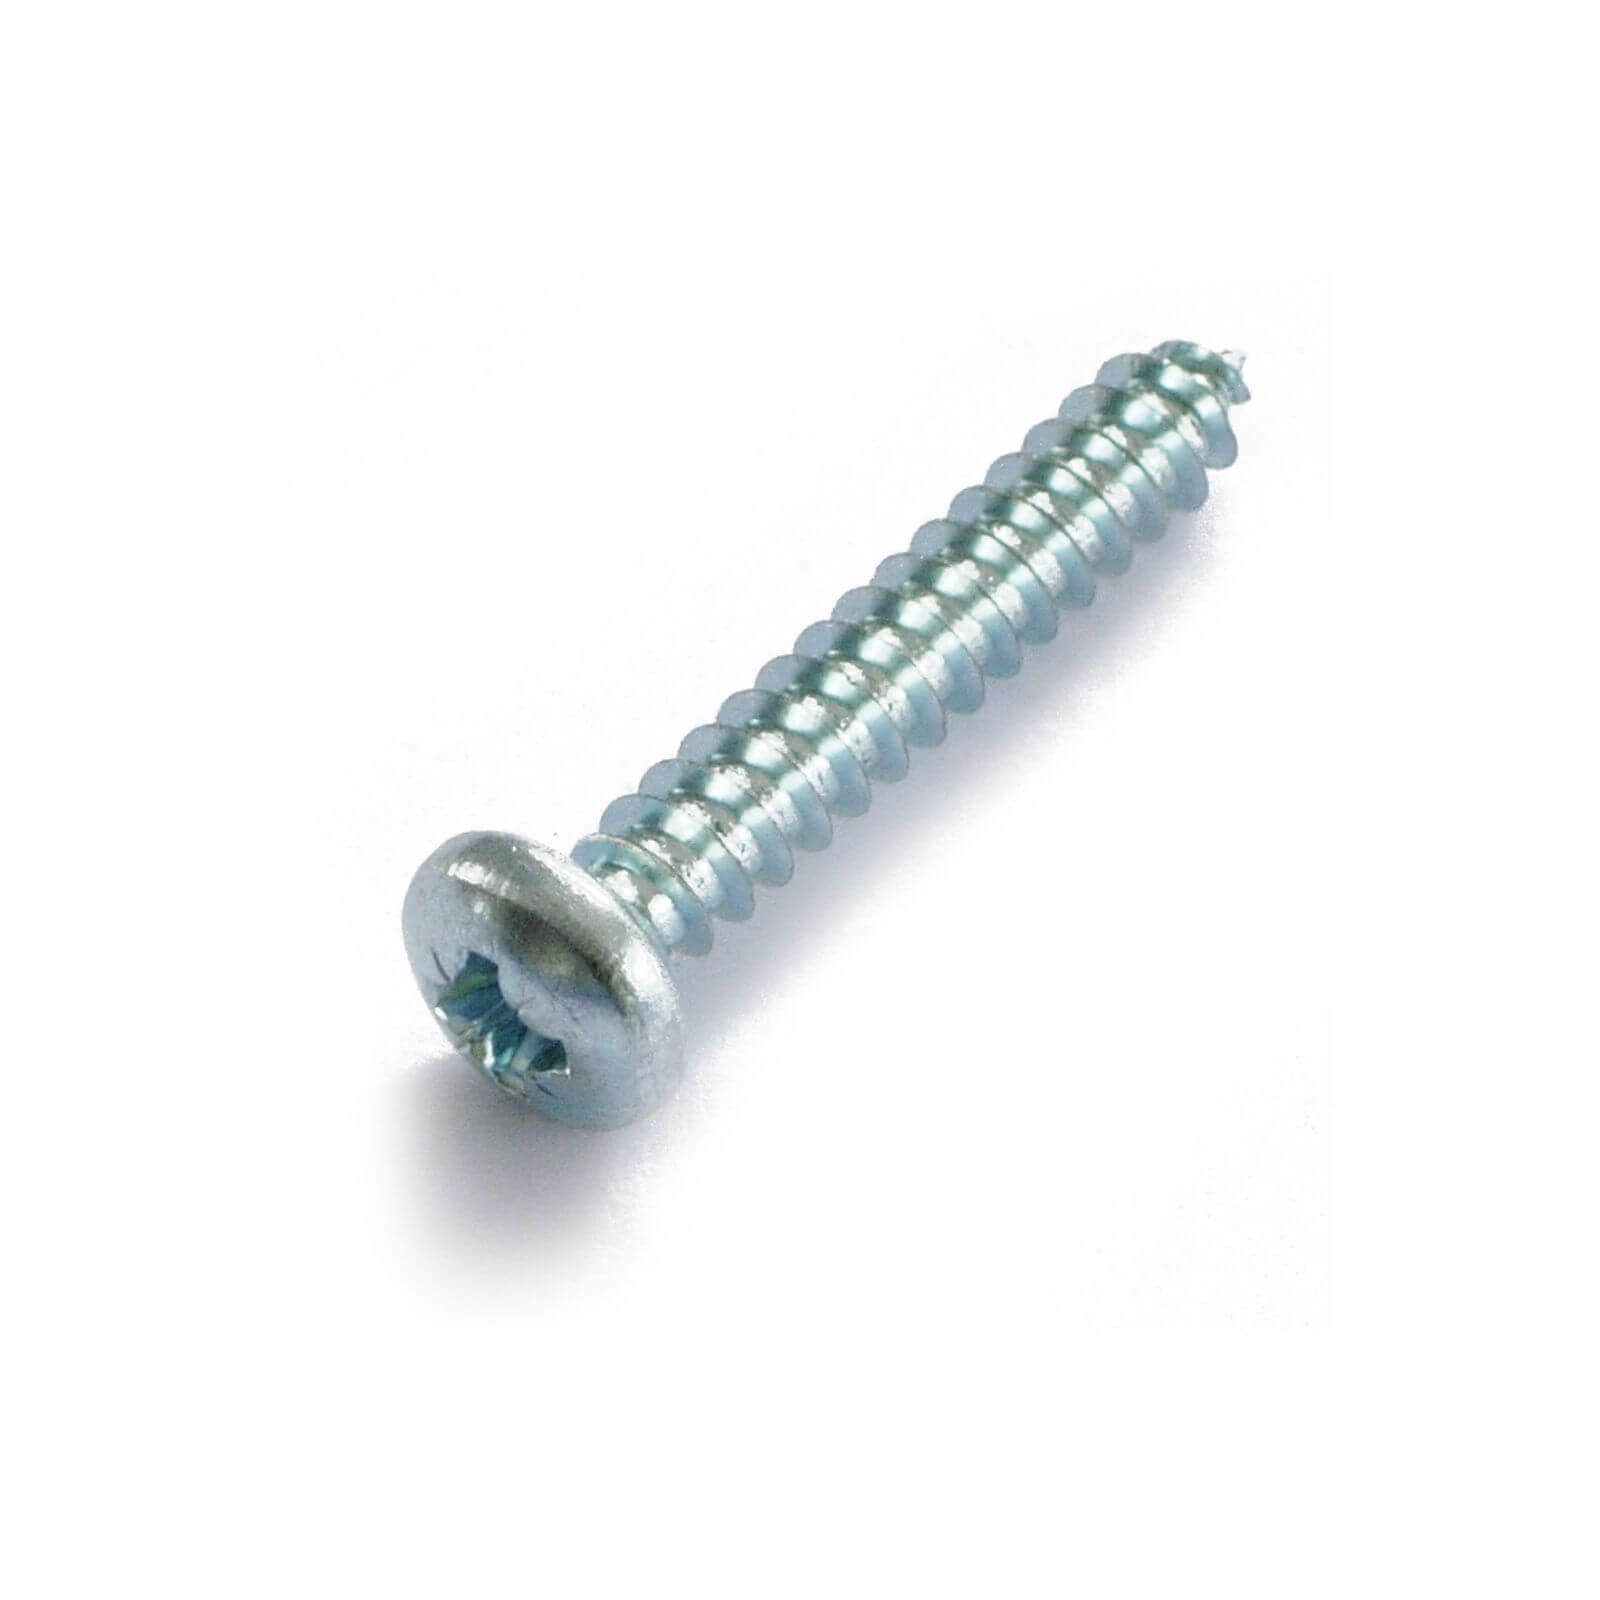 Self Tapping Screw - Bright Zinc Plated - 4 x 30mm - 10 Pack